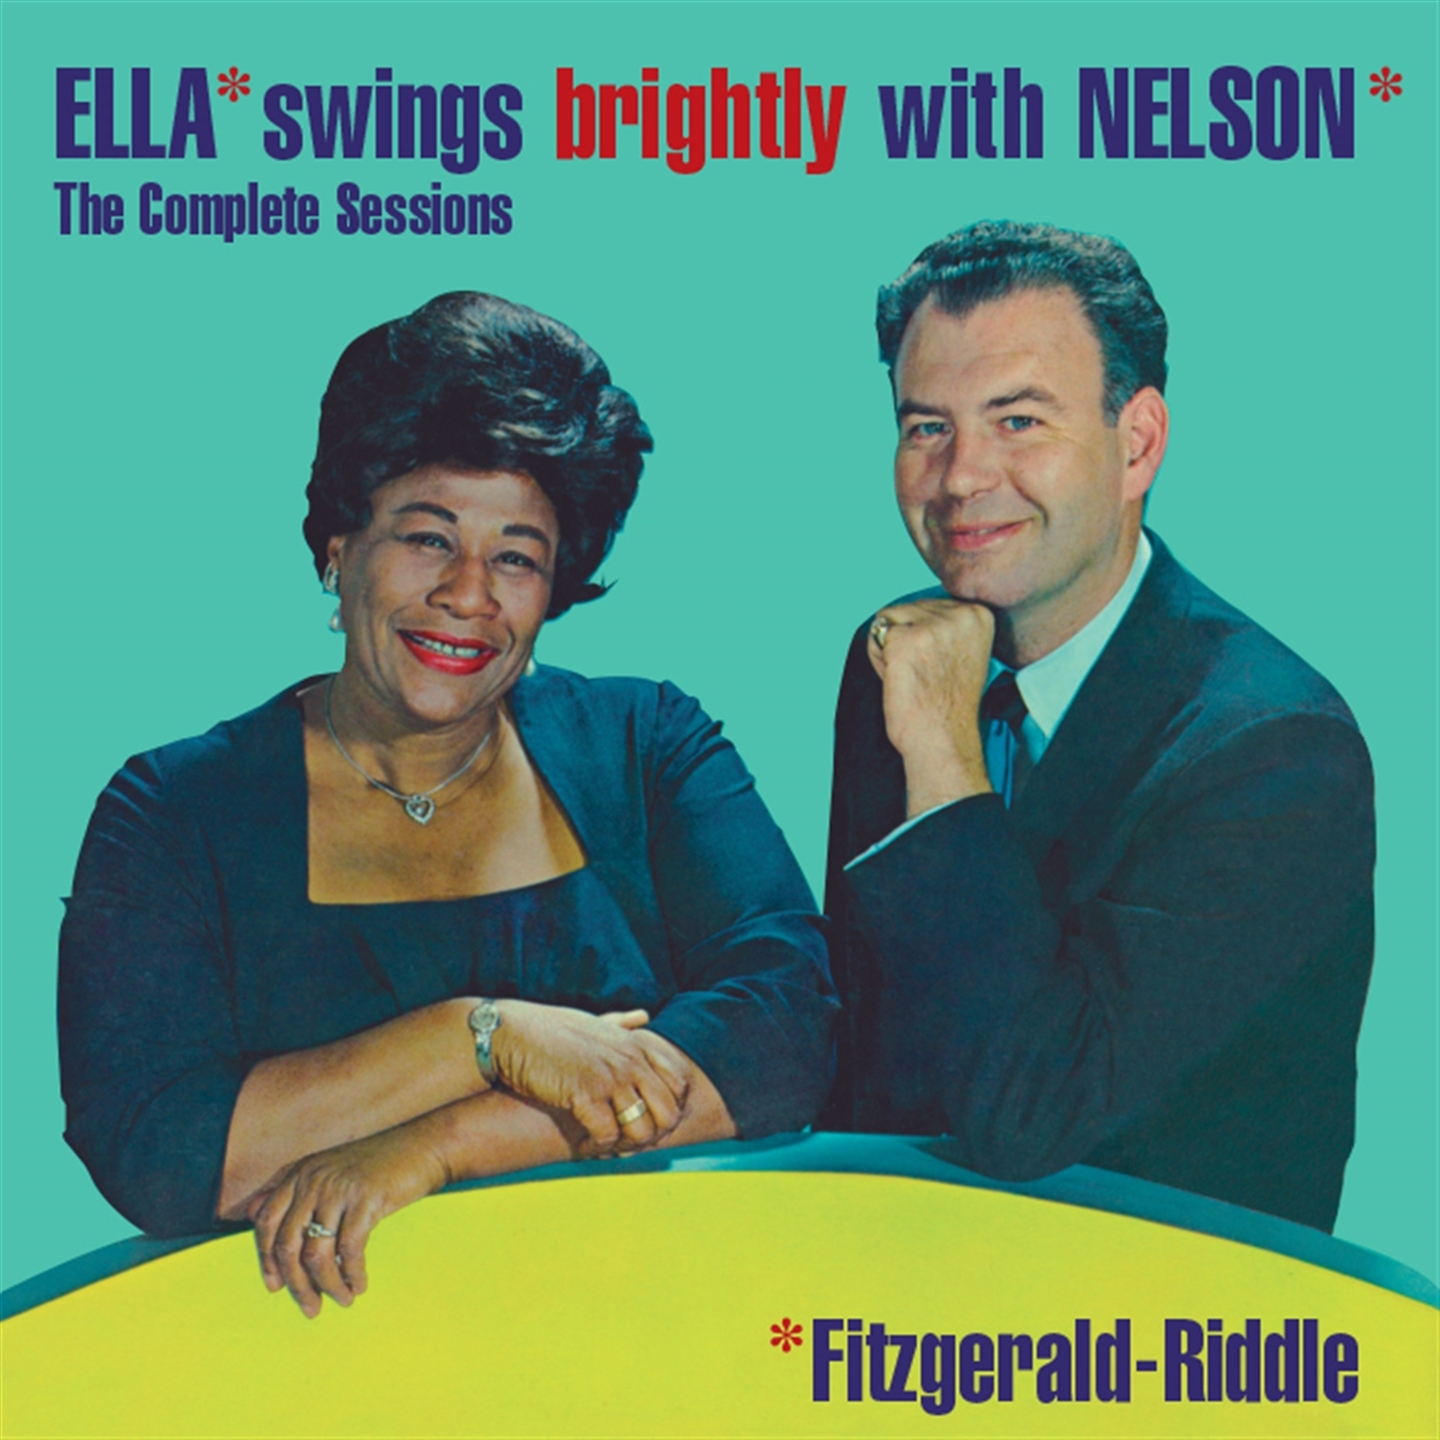 ELLA SWINGS BRIGHTLY WITH NELSON - THE COMPLETE SESSIONS